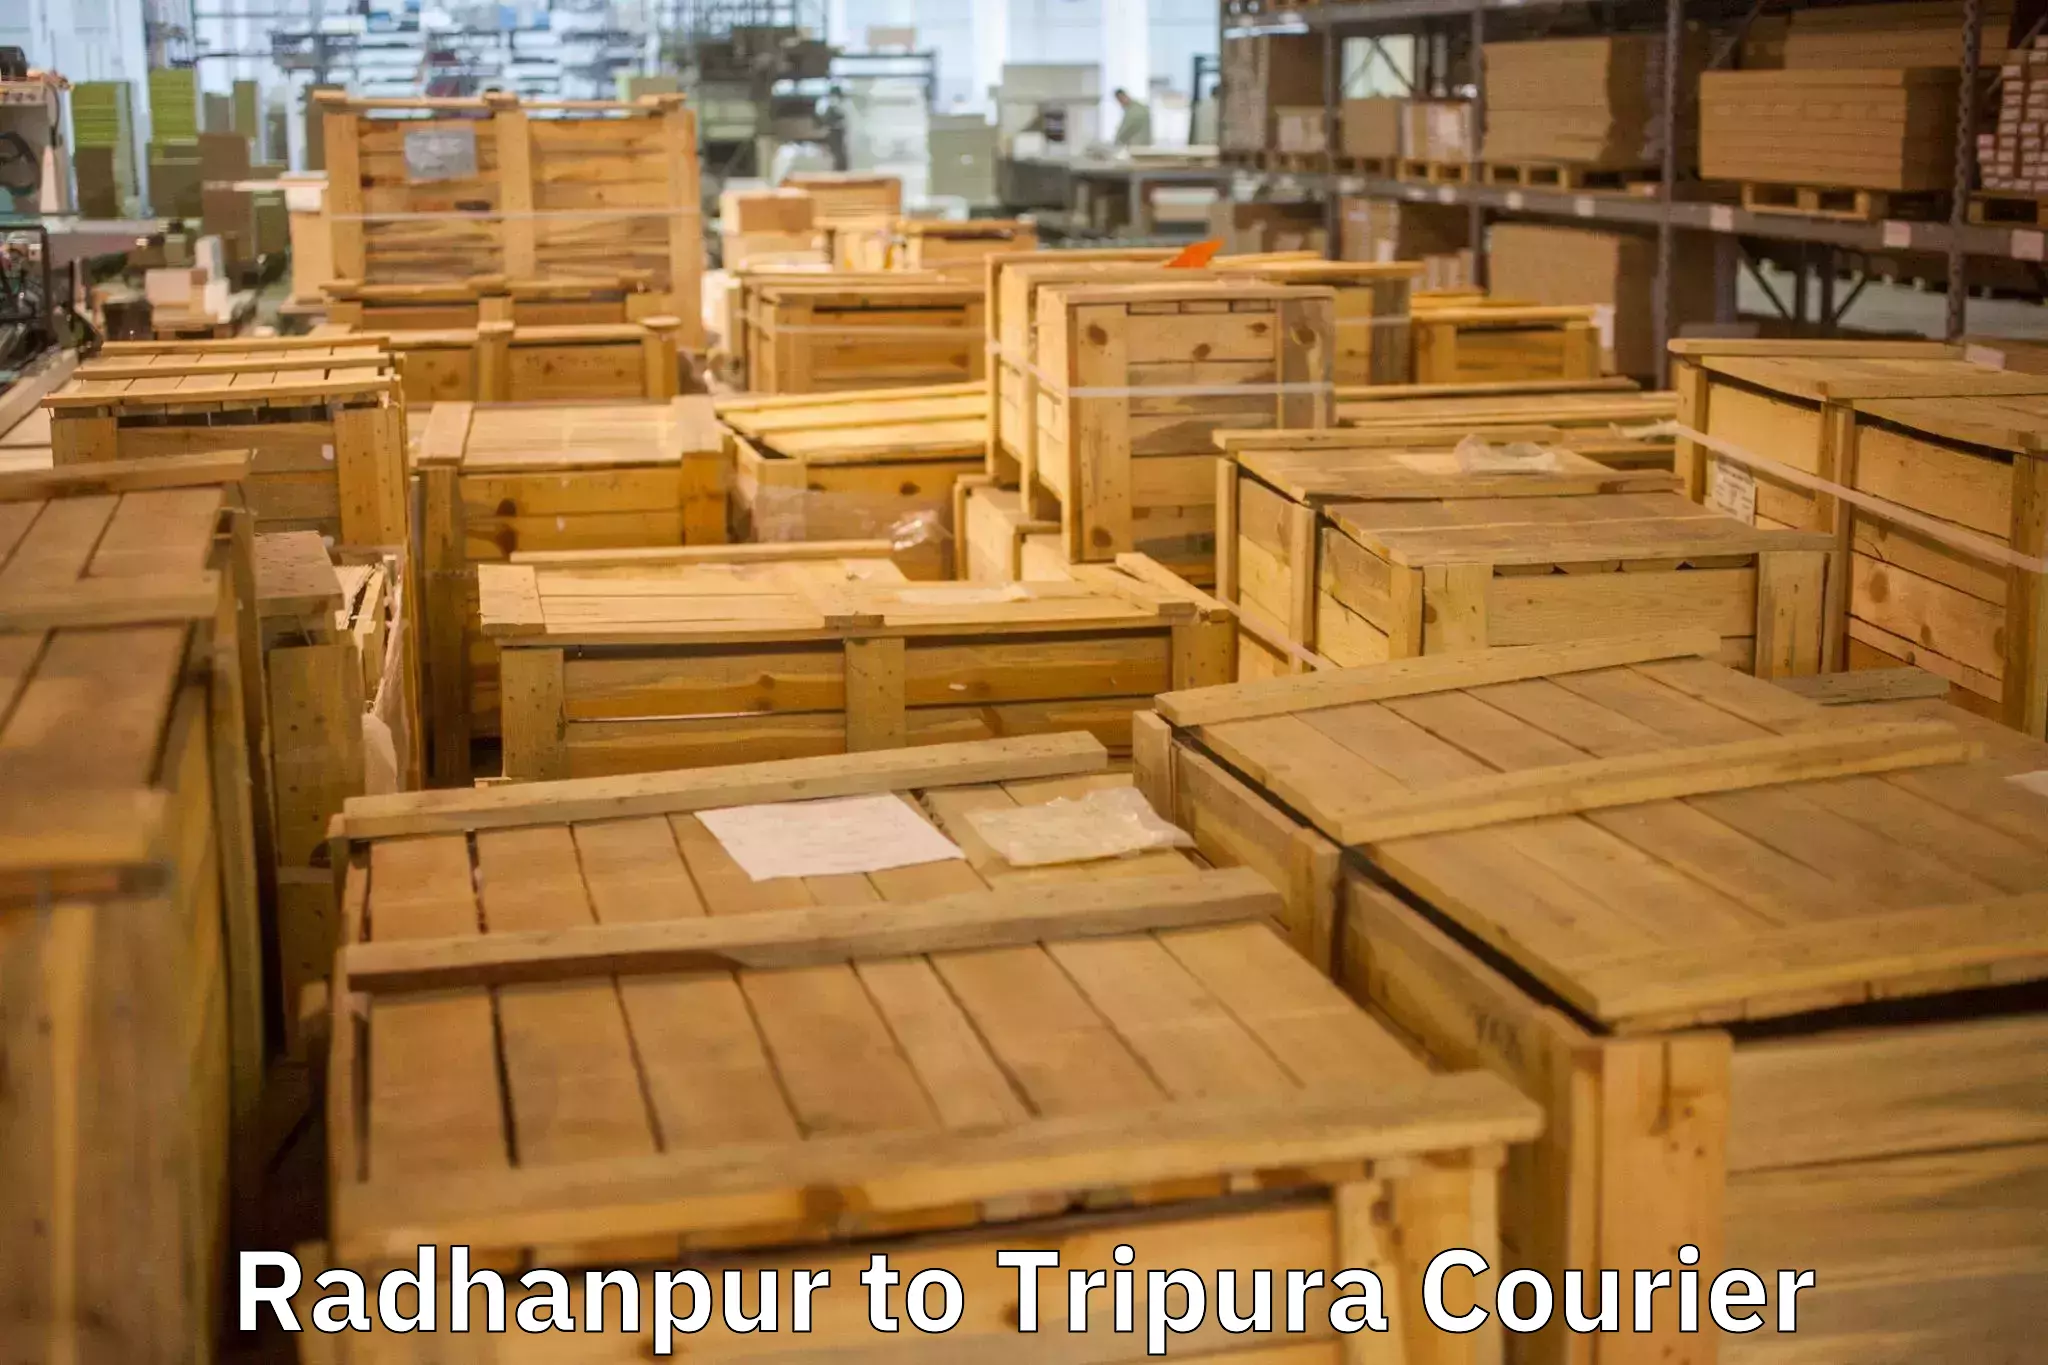 Full-service household moving Radhanpur to Udaipur Tripura